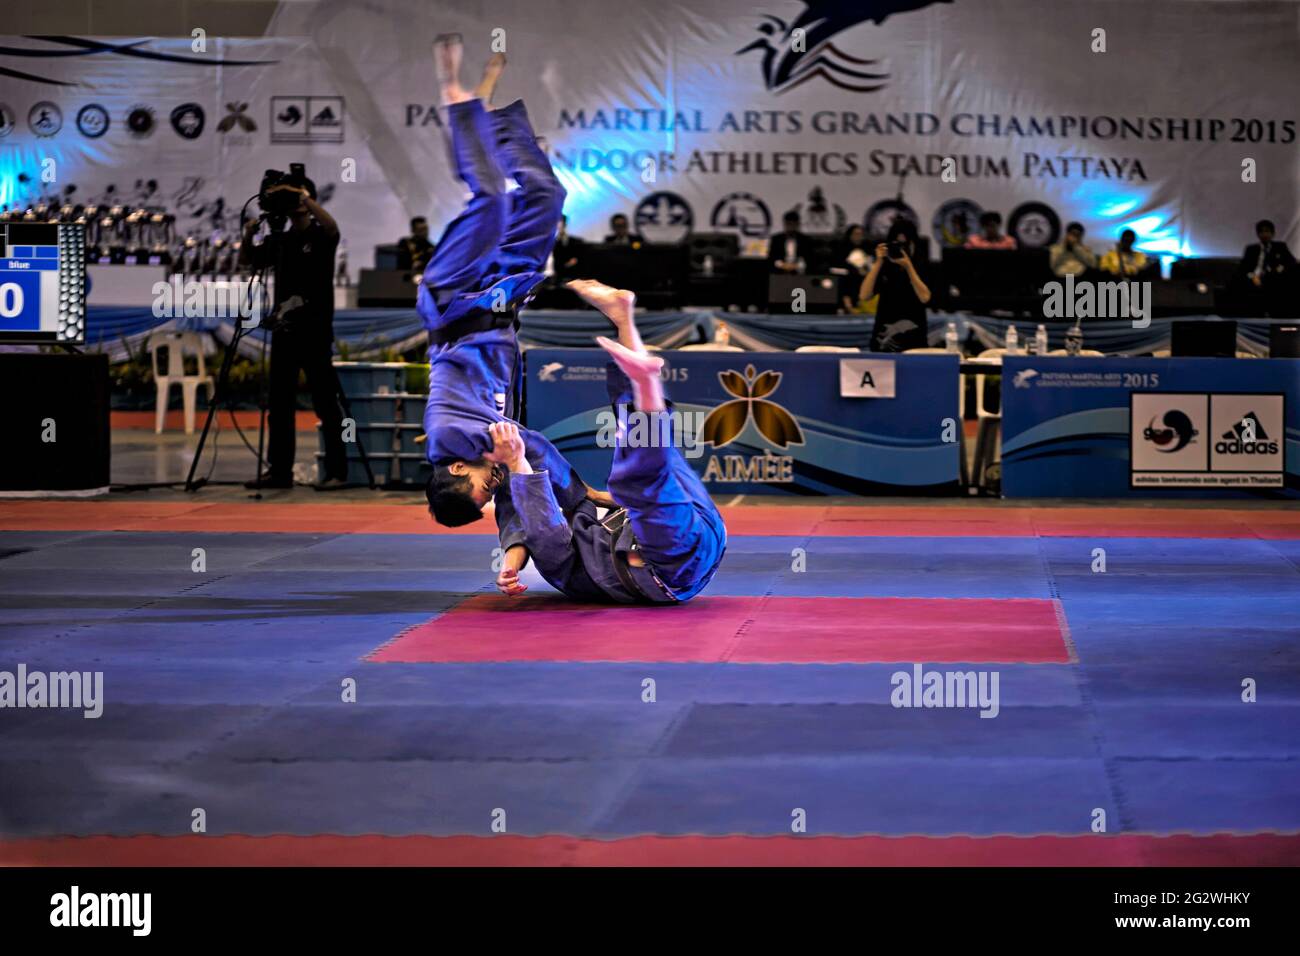 Judo throw nage waza with competitor upended in mid air at a martial arts tournament Stock Photo